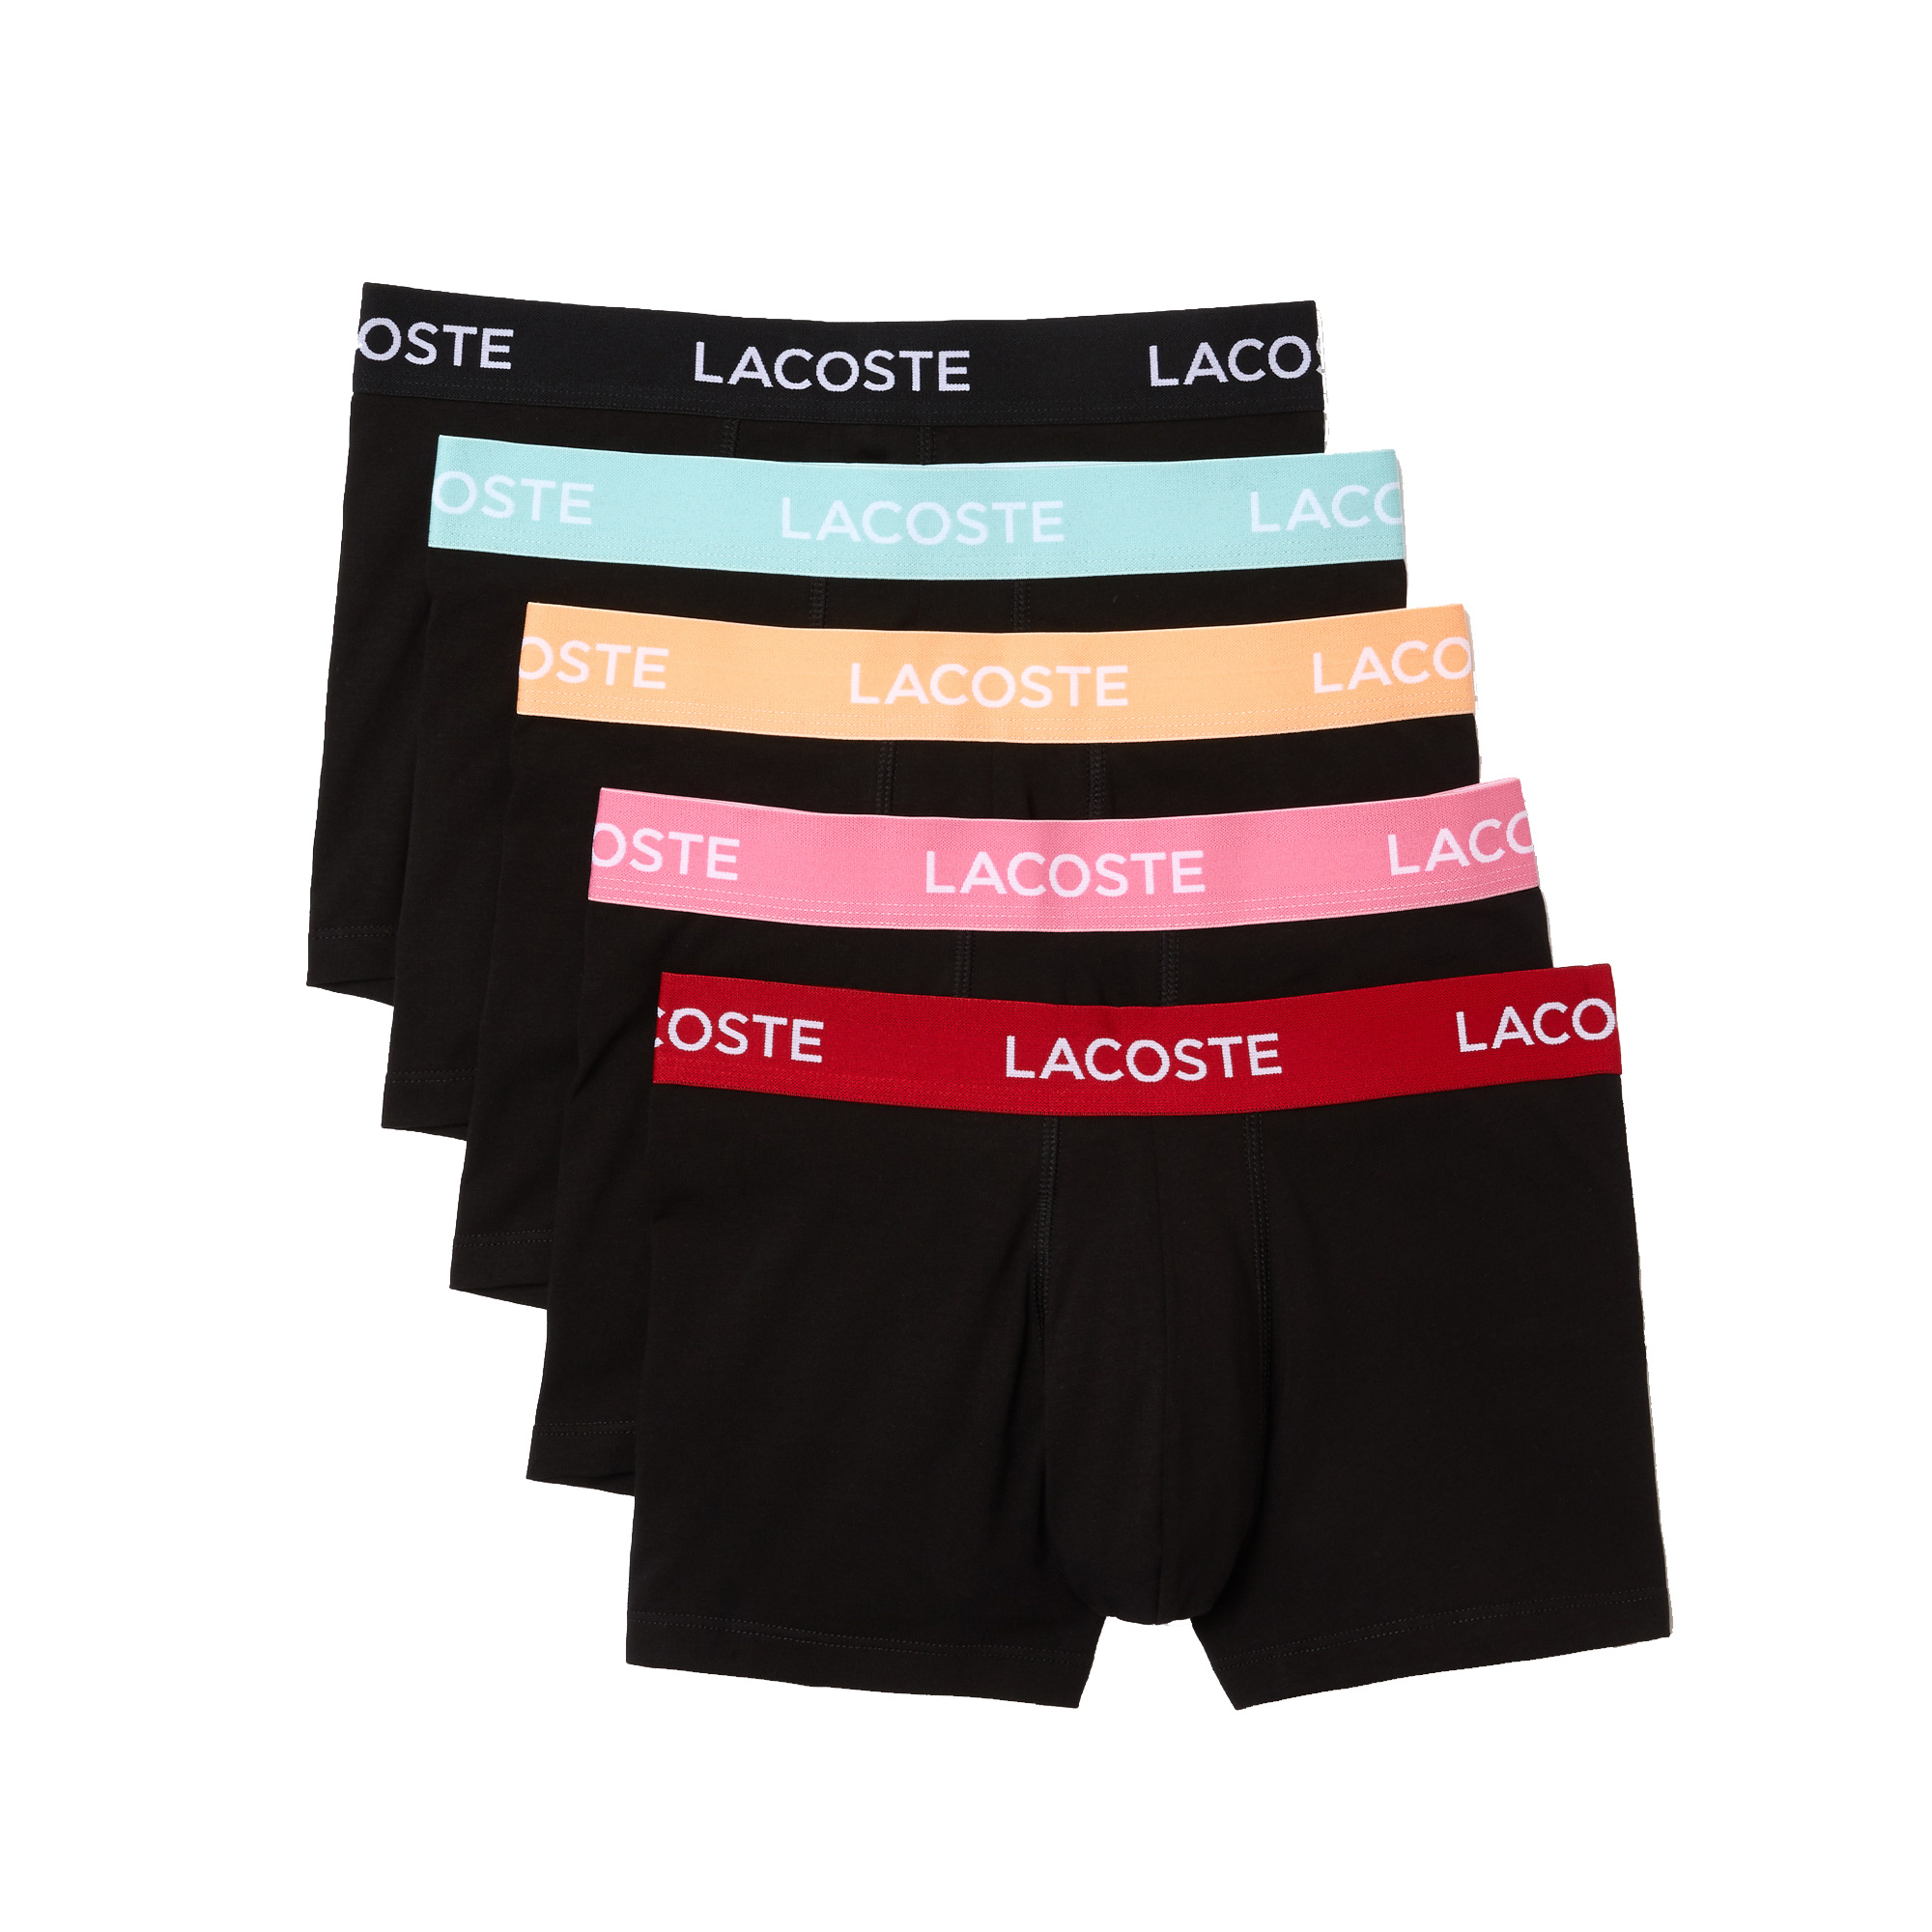 Lacoste Lacoste Casual Boxershorts Heren Multipack Zwart 5 Pack